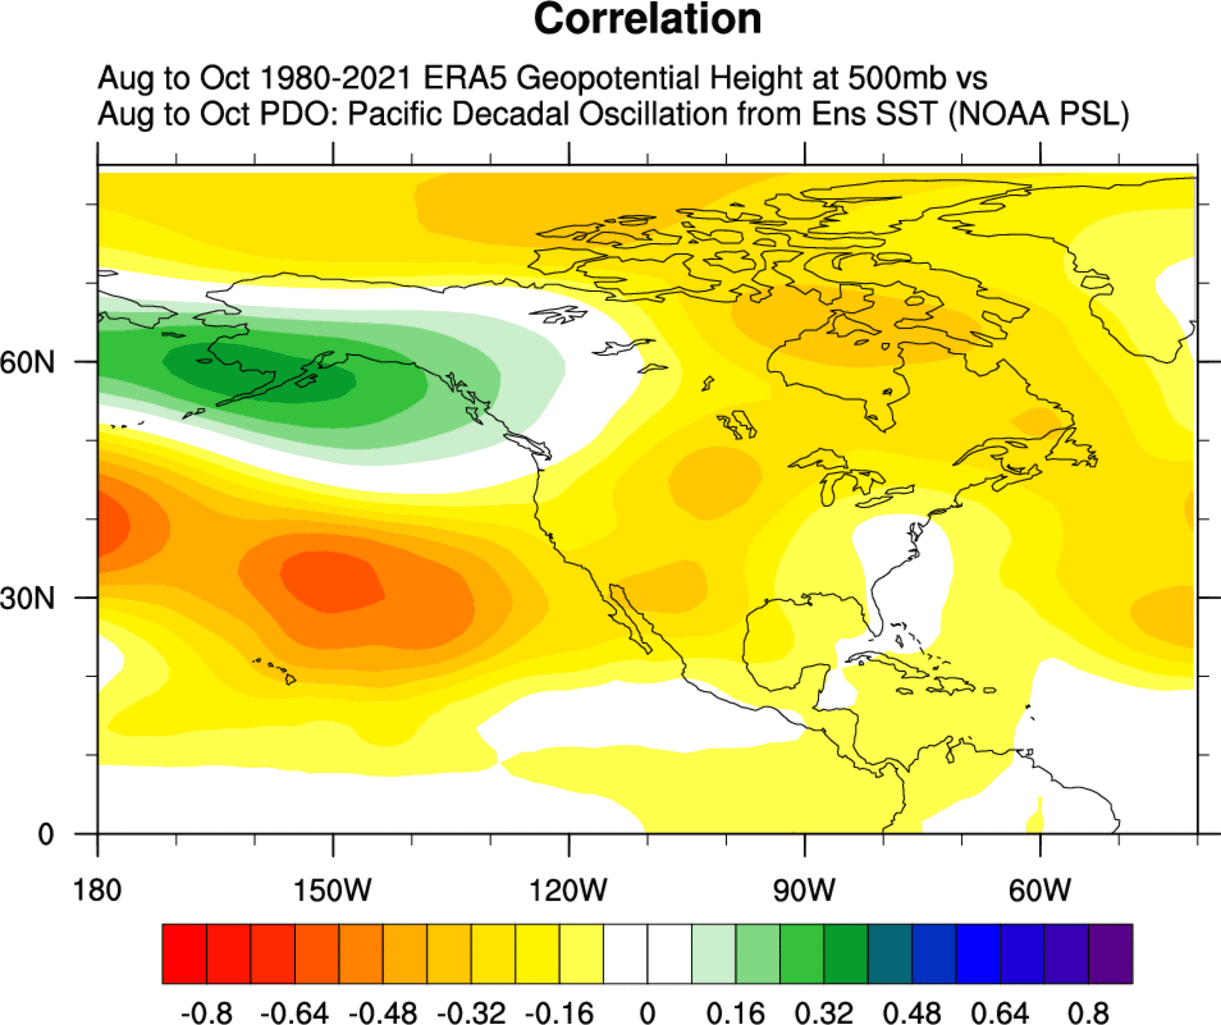 ocean-atmosphere-influence-united-states-canada-winter-autumn-season-pacific-decadal-oscillation-pressure-anomaly-pattern